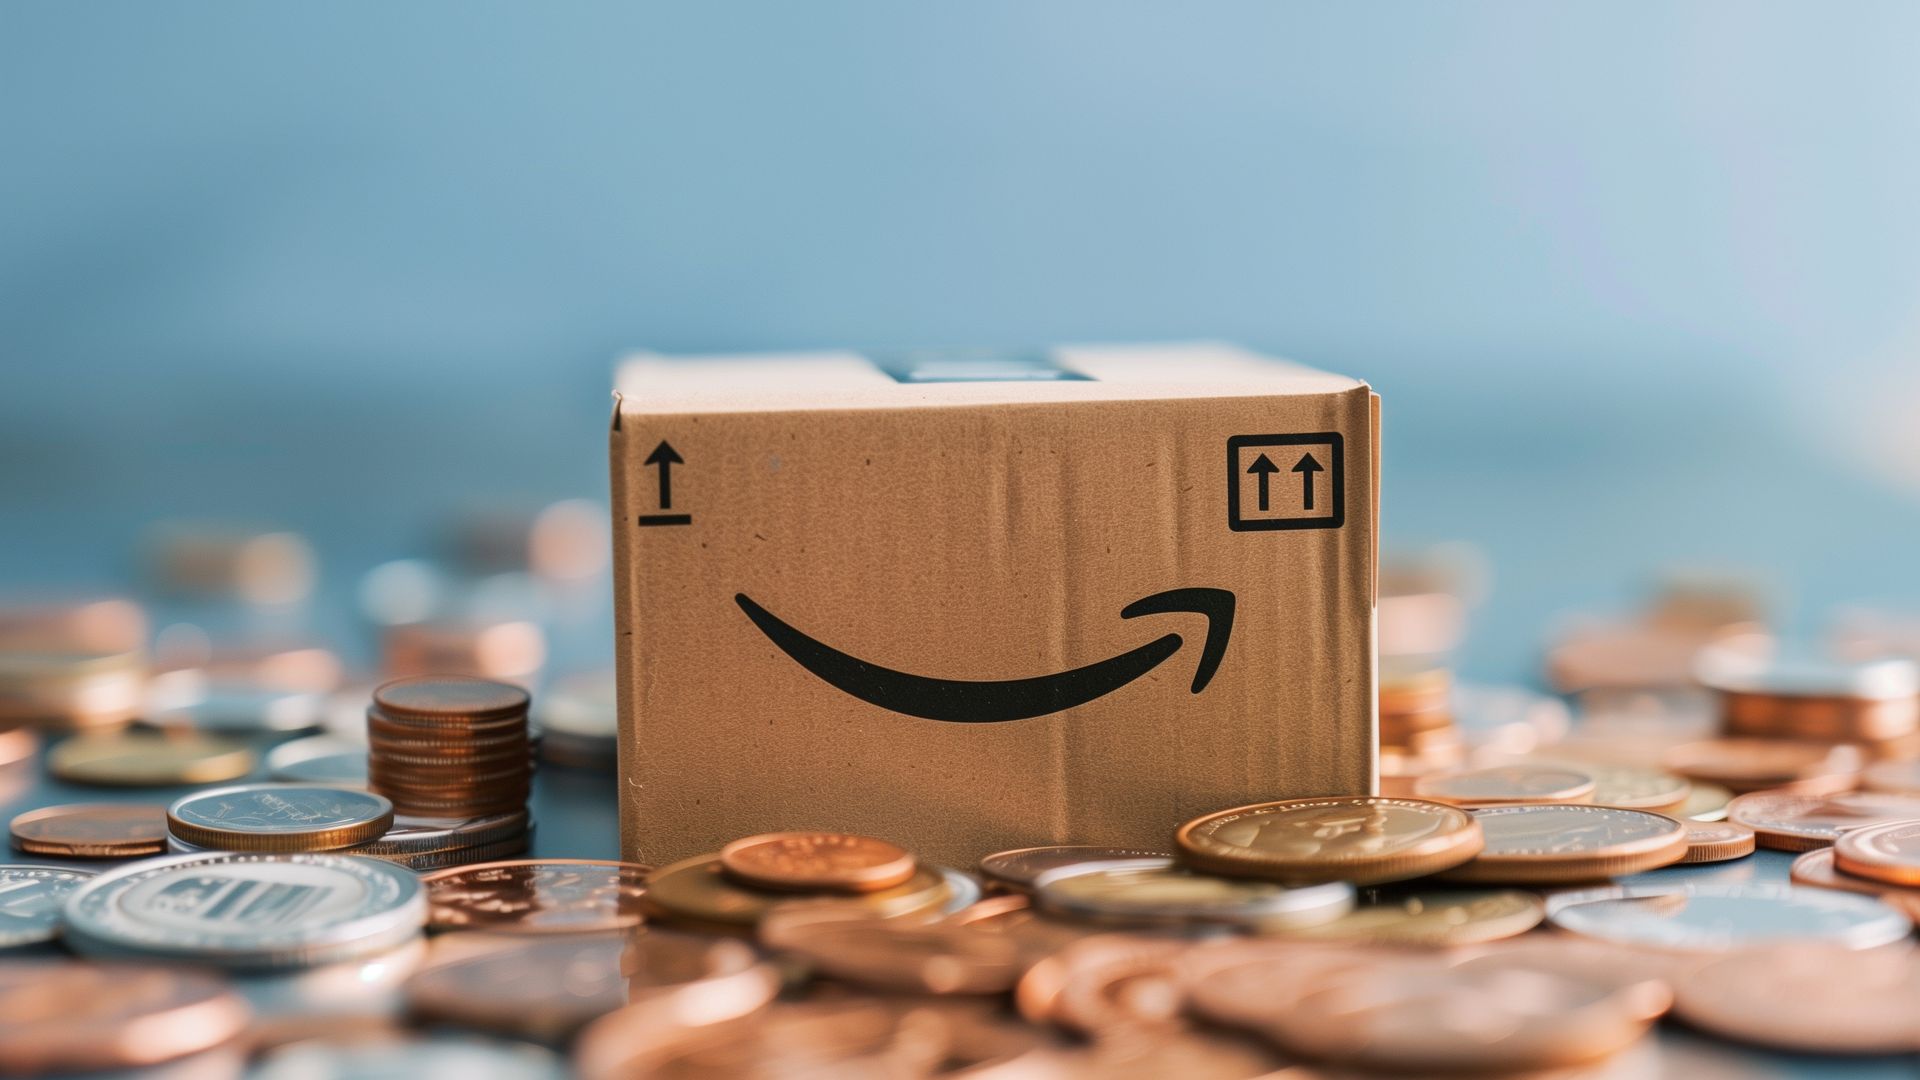 Amazon box surrounded by coins